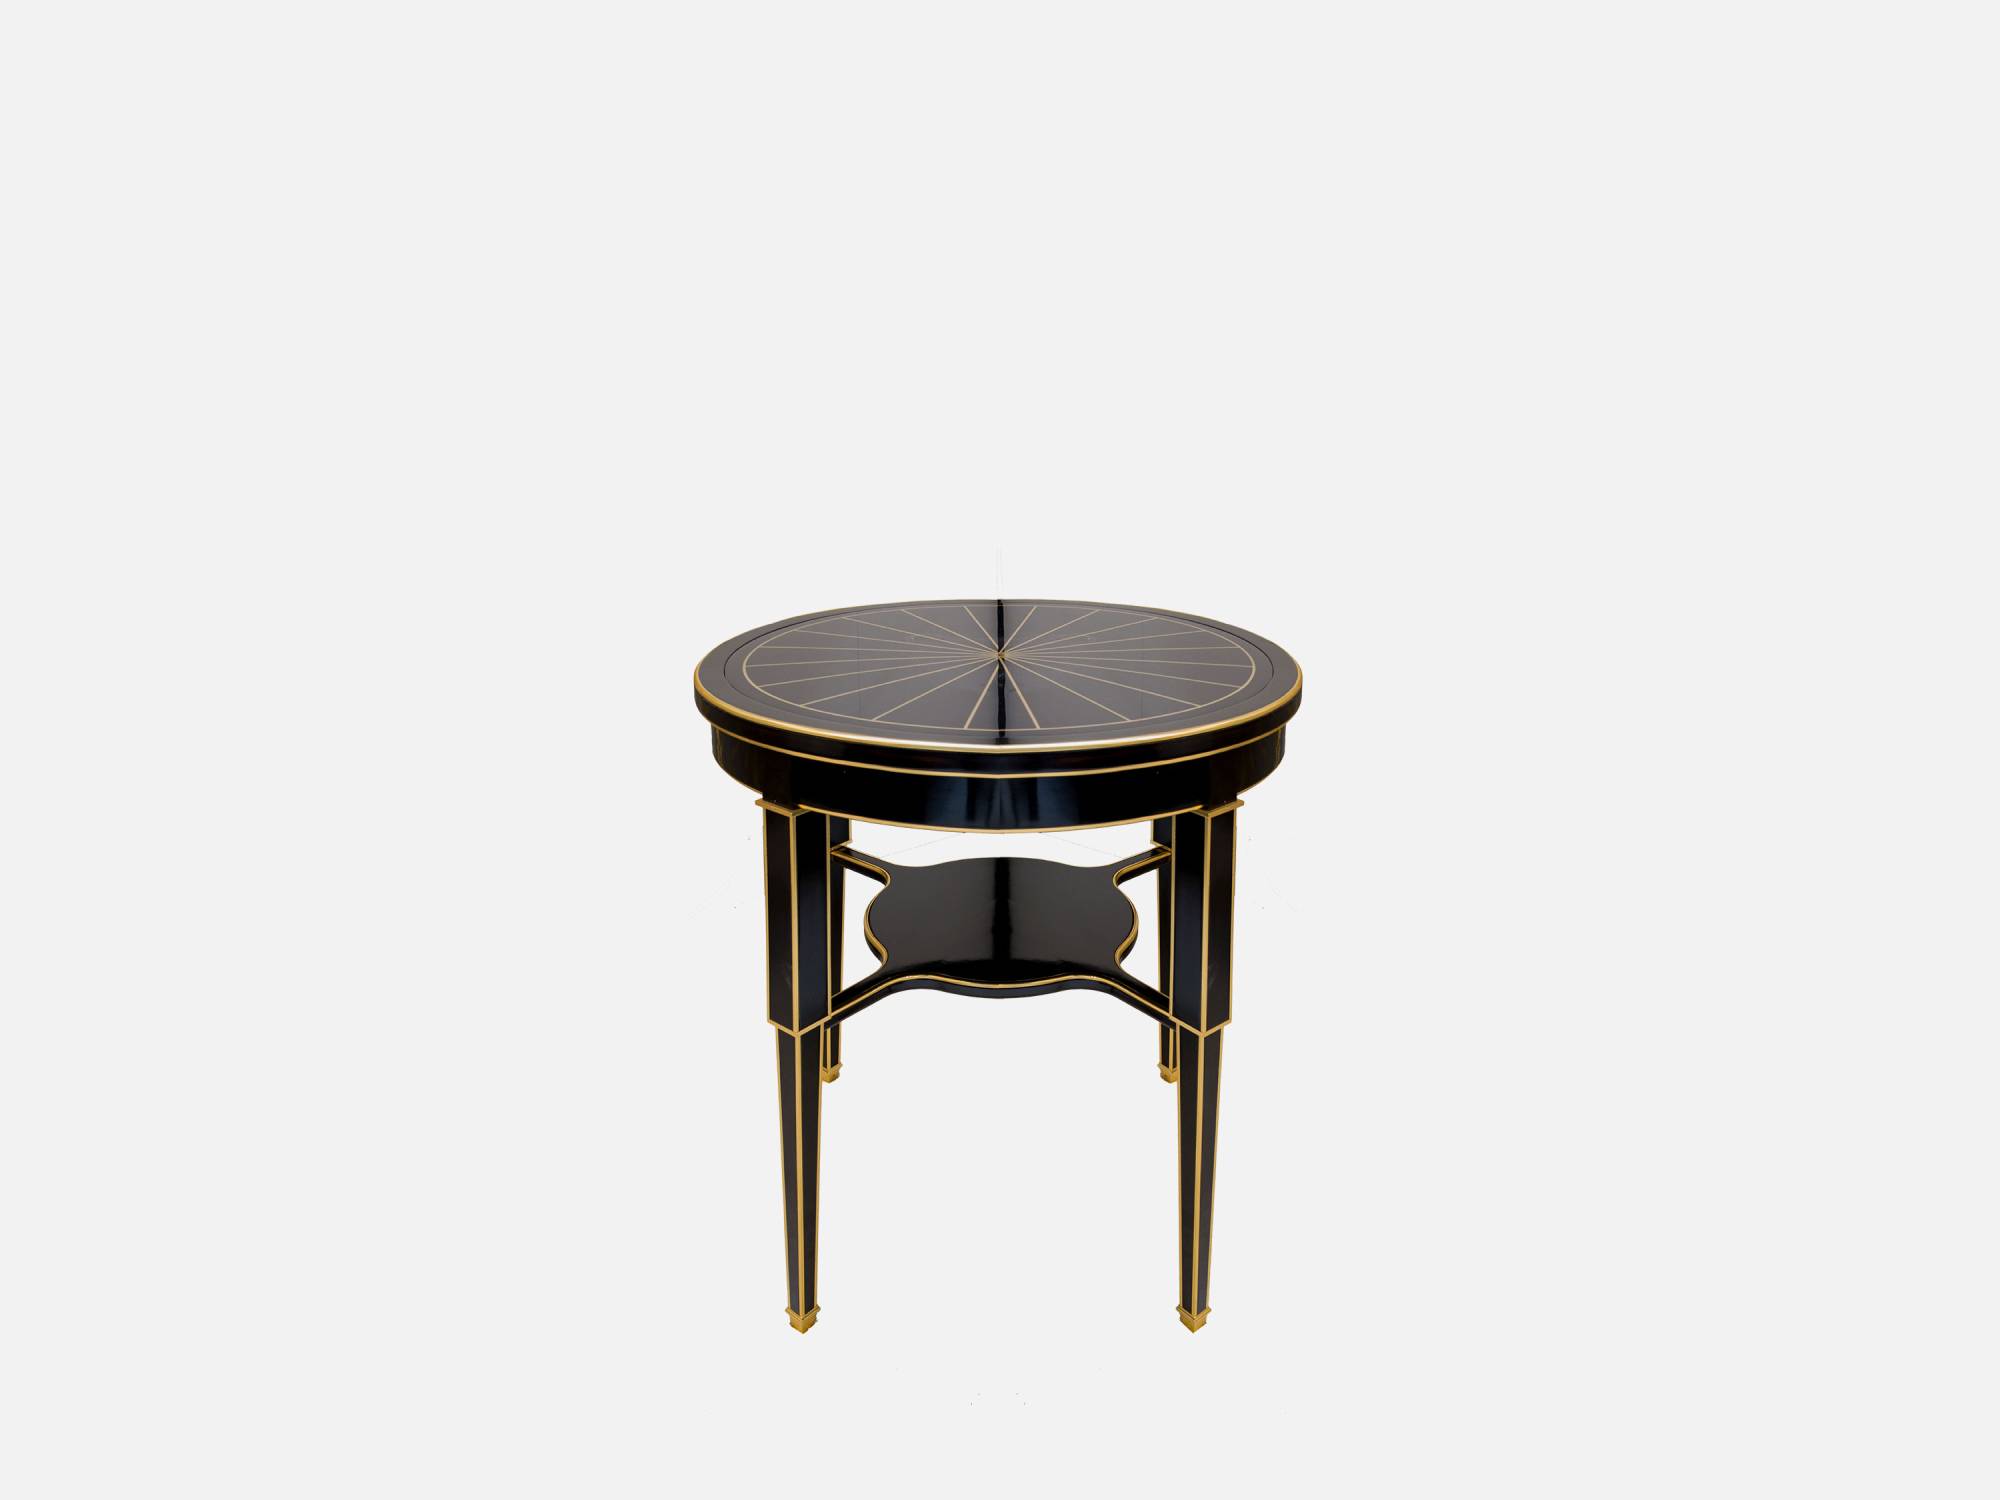 ART. 2220 – The elegance of luxury classic Small tables made in Italy by C.G. Capelletti.